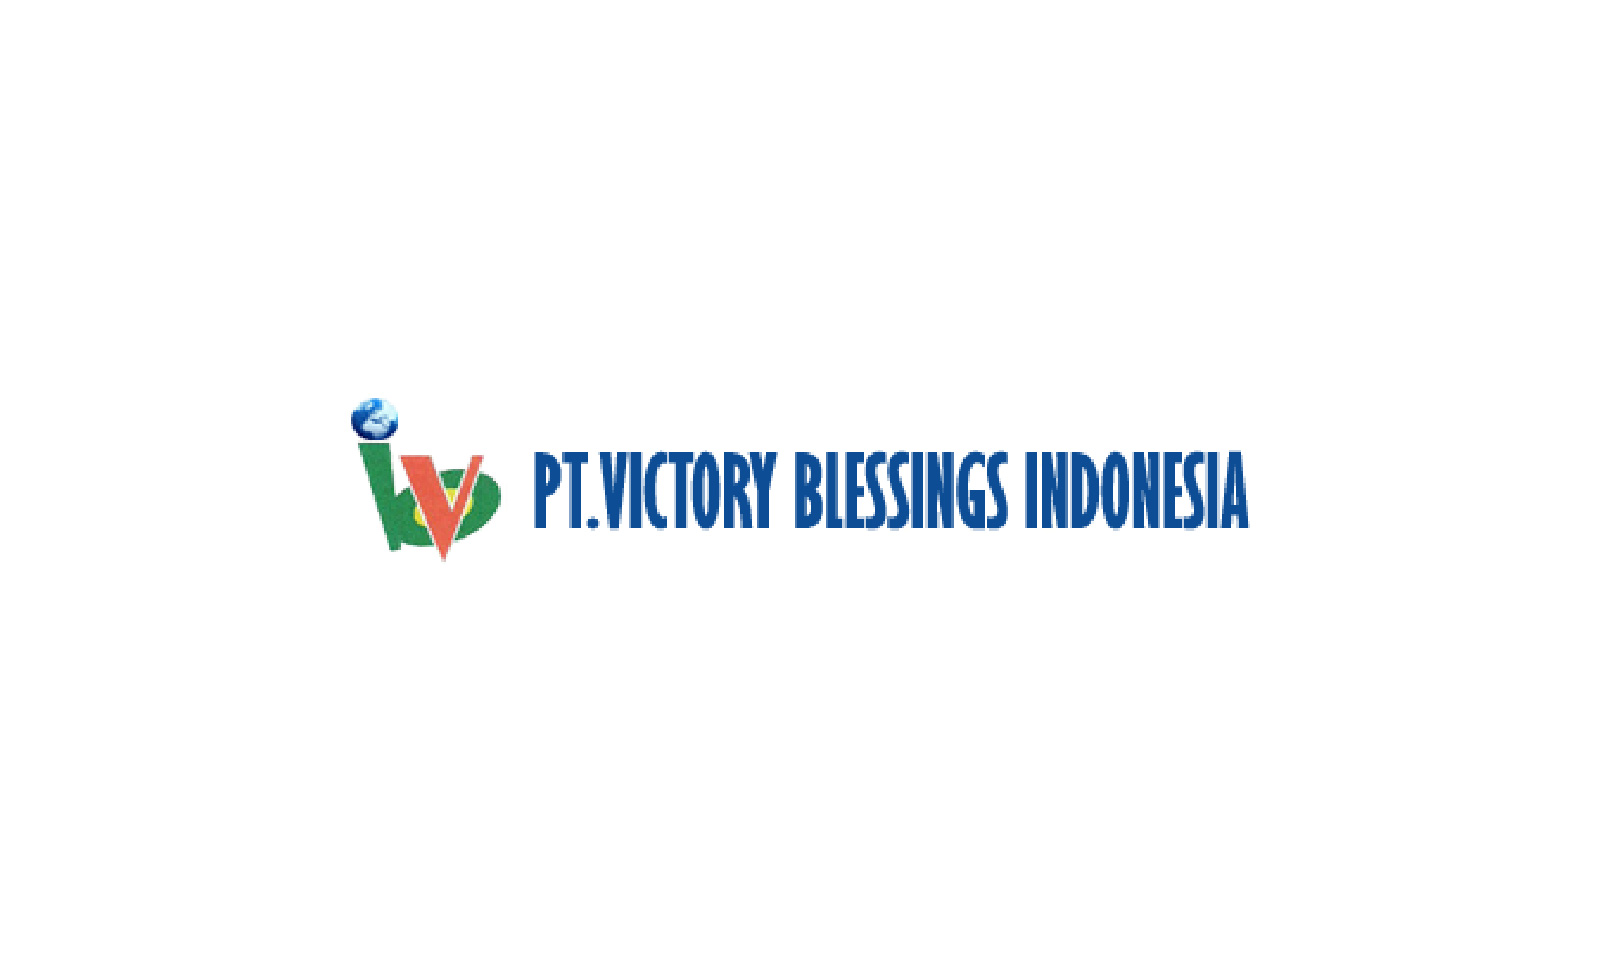 PT Victory Blessings Indonesia 02